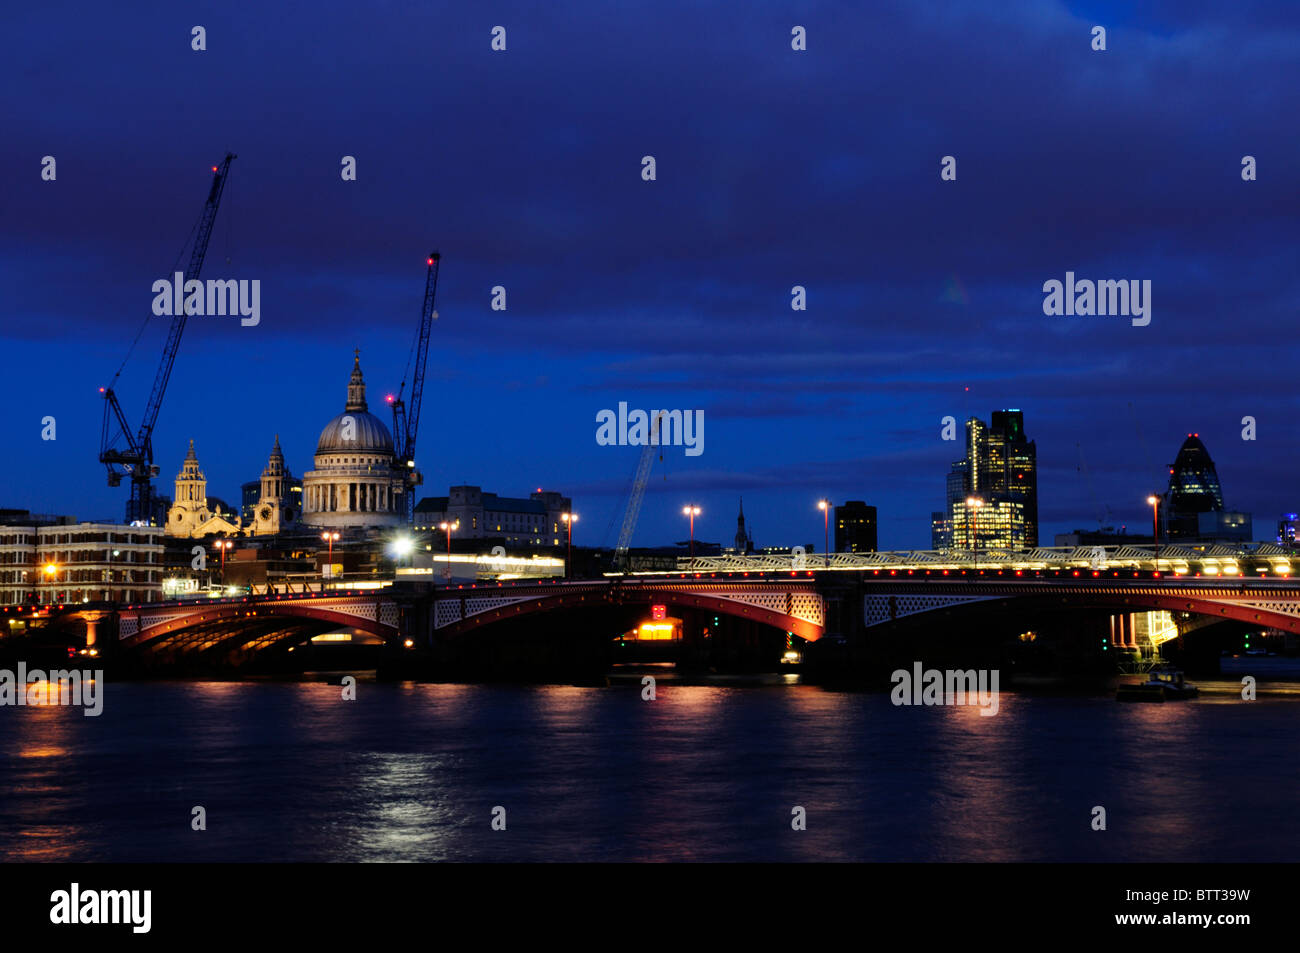 Blackfriars Bridge, St Paul's Cathedral and City of London Buildings at dusk, London, England, UK Stock Photo